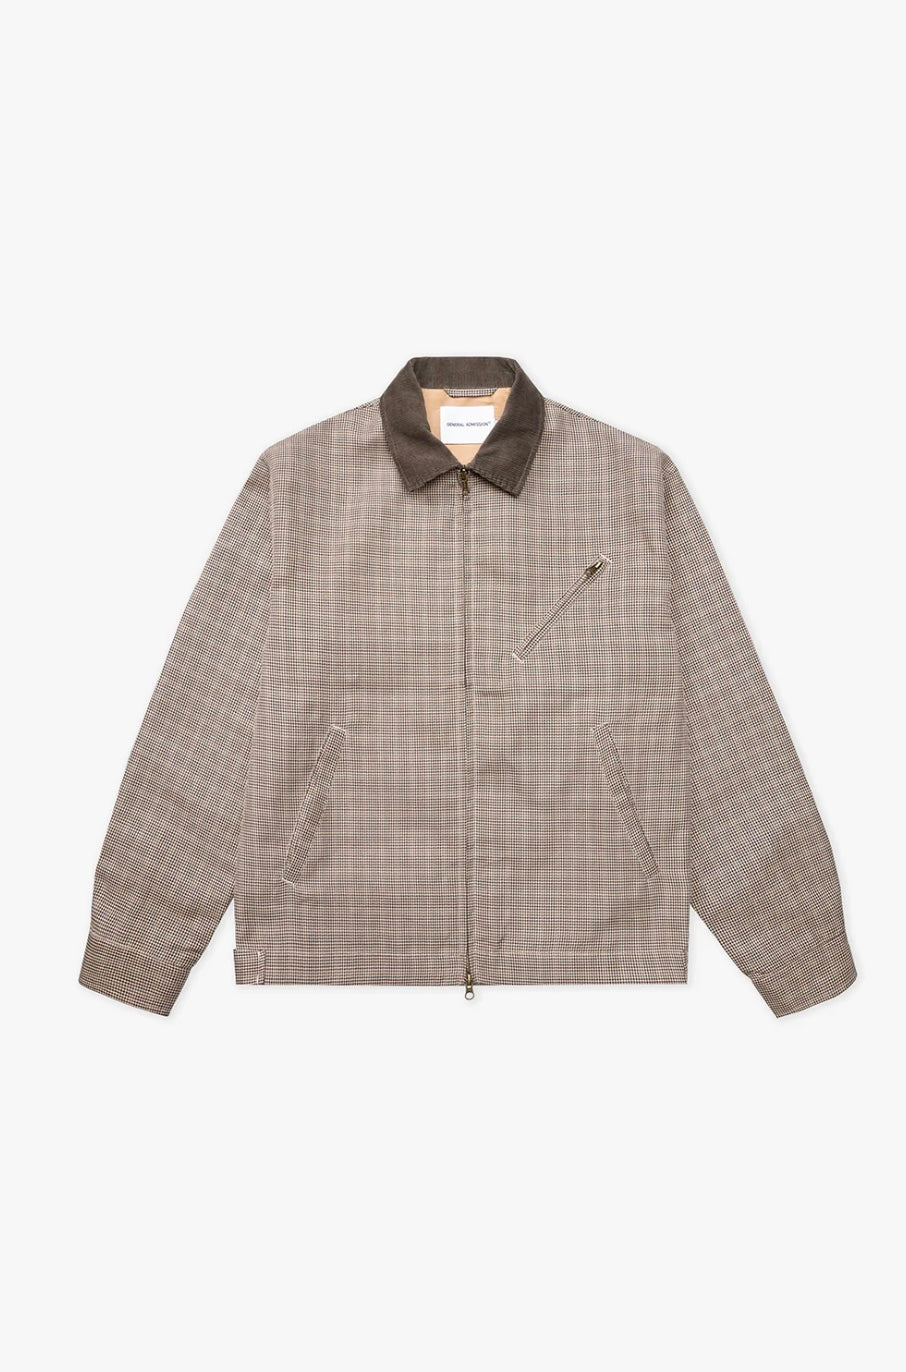 General Admission - GENERAL ADMISSION PLAID JACKET IN BEIGE CHECK - Rent With Thred